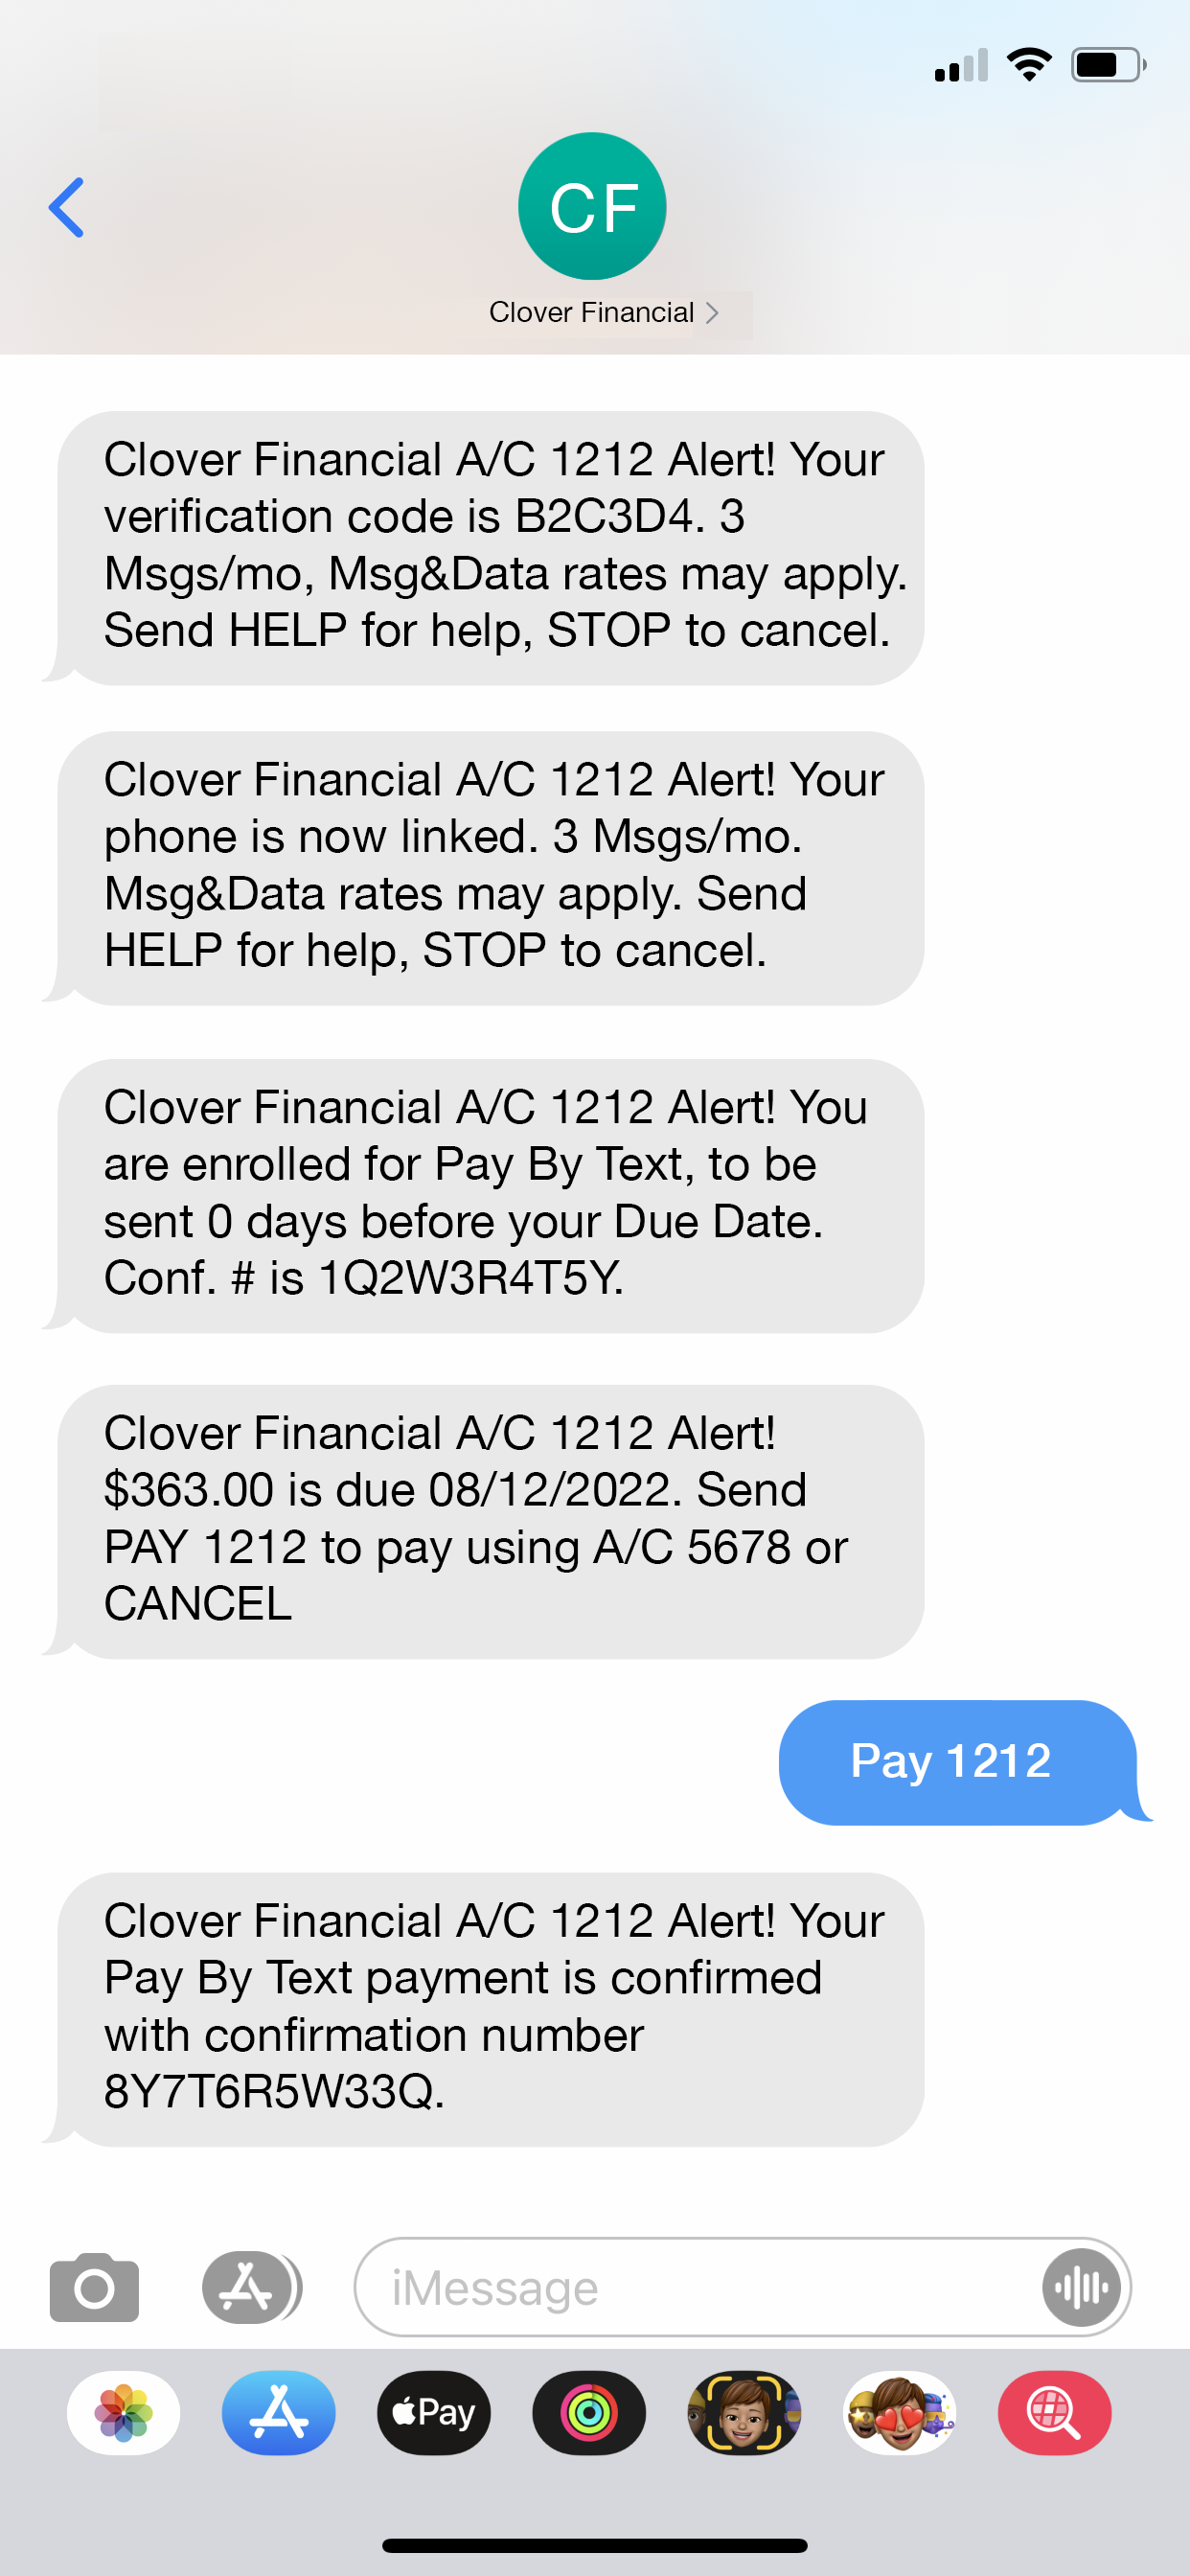 Pay by text simplifies bill payments by offering convenience, speed, and personalization through SMS messaging. Engage customers on their preferred channel, enhance payment experience, and accelerate receivables.